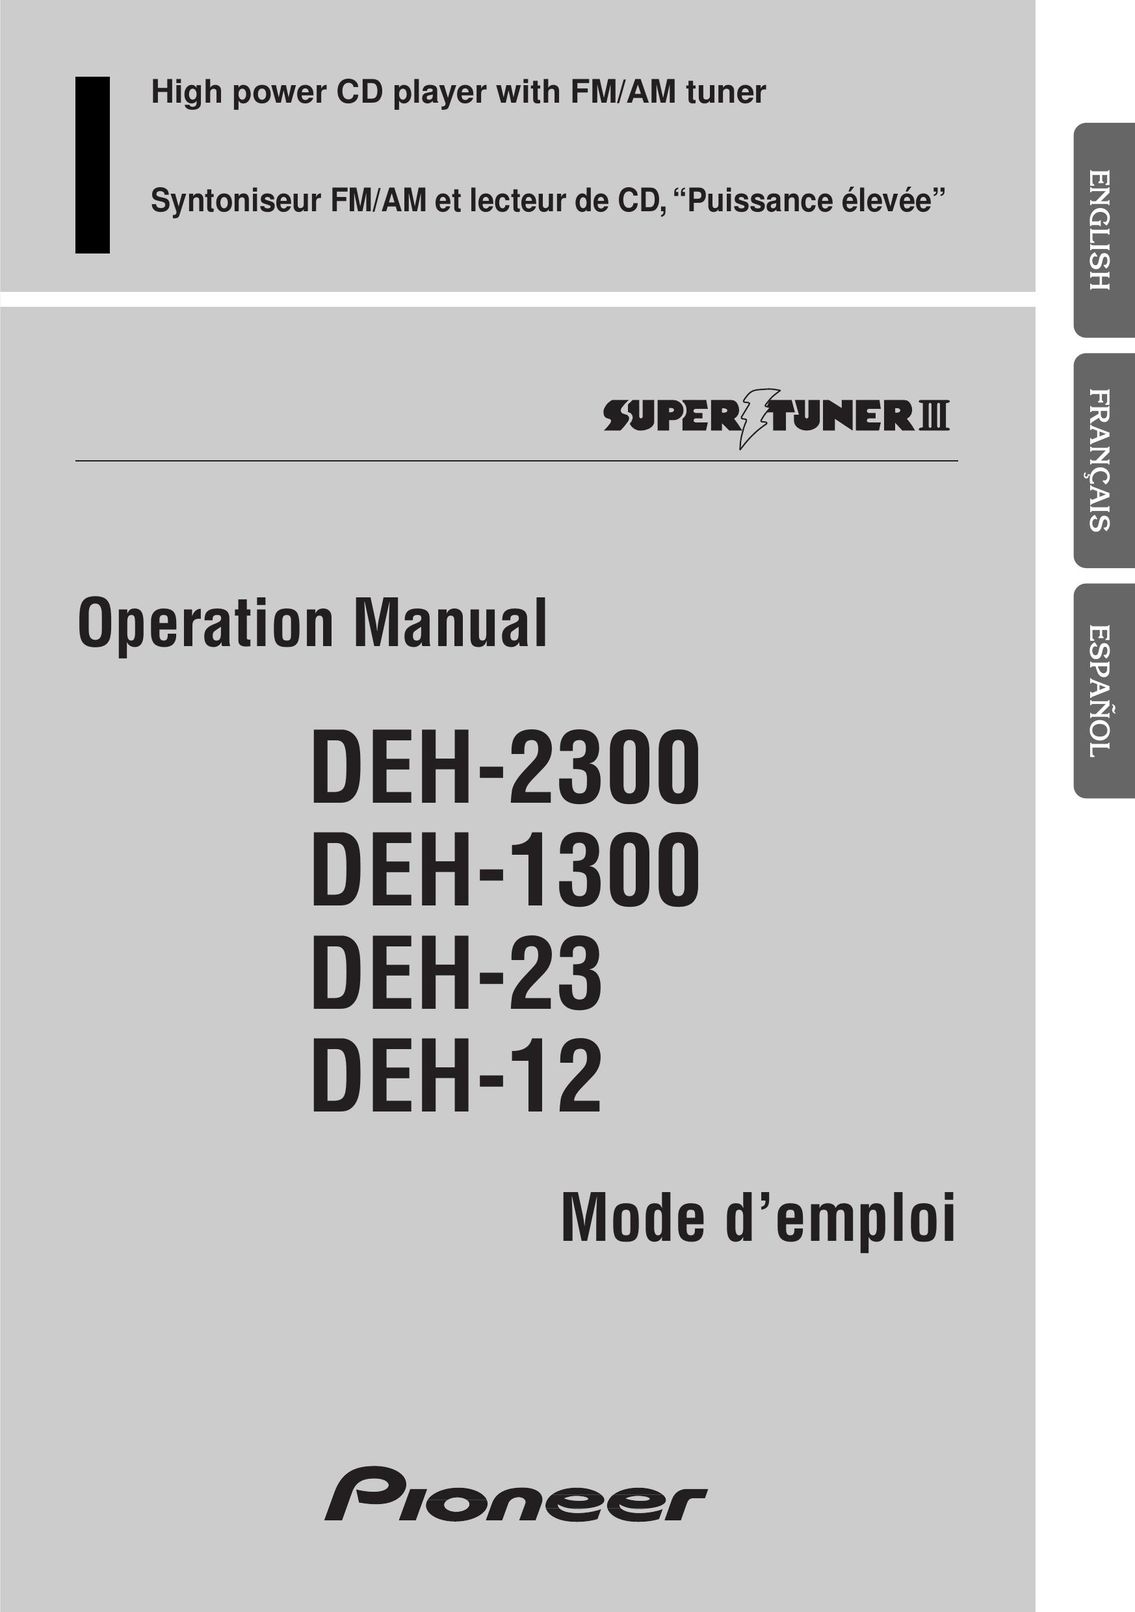 Pioneer DEH-12 Stereo System User Manual